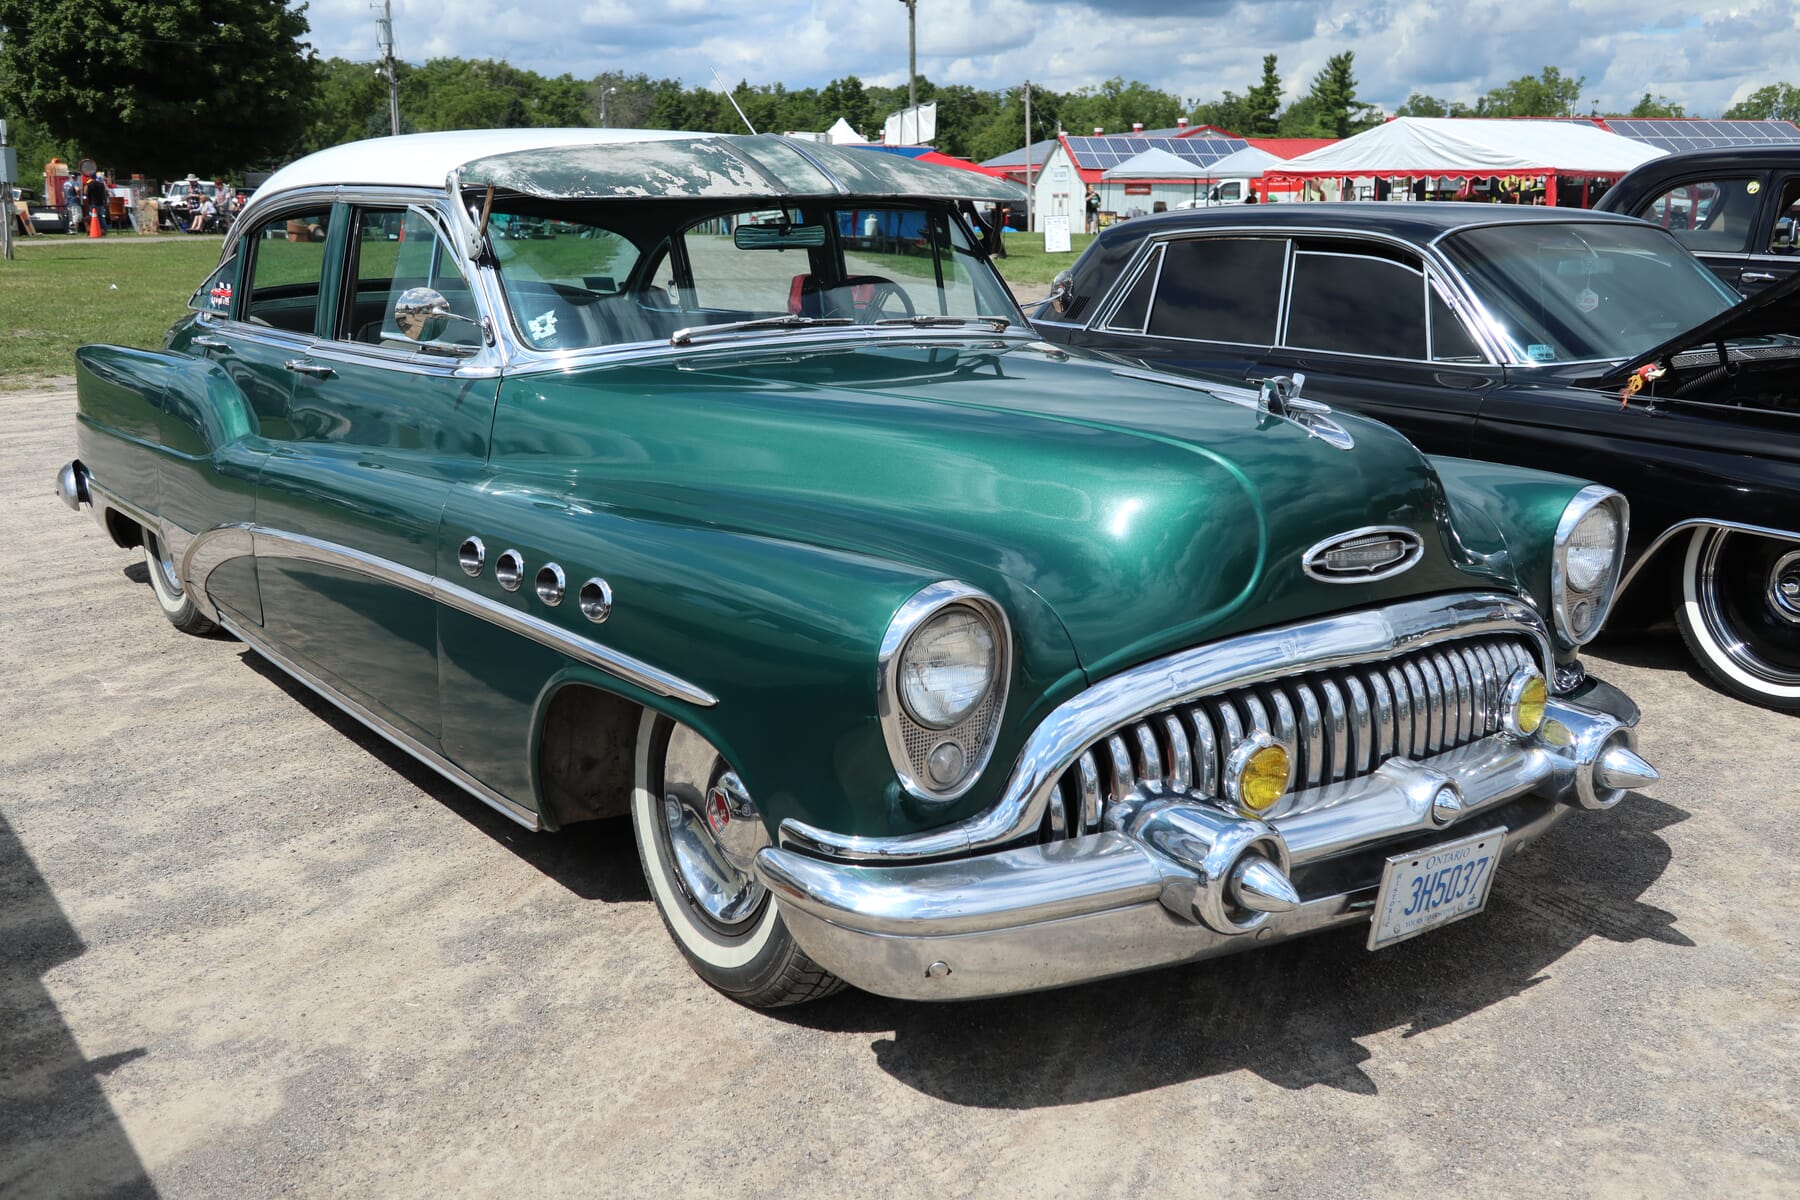 1953 Buick Roadmaster with new chrome and thin whitewall tires